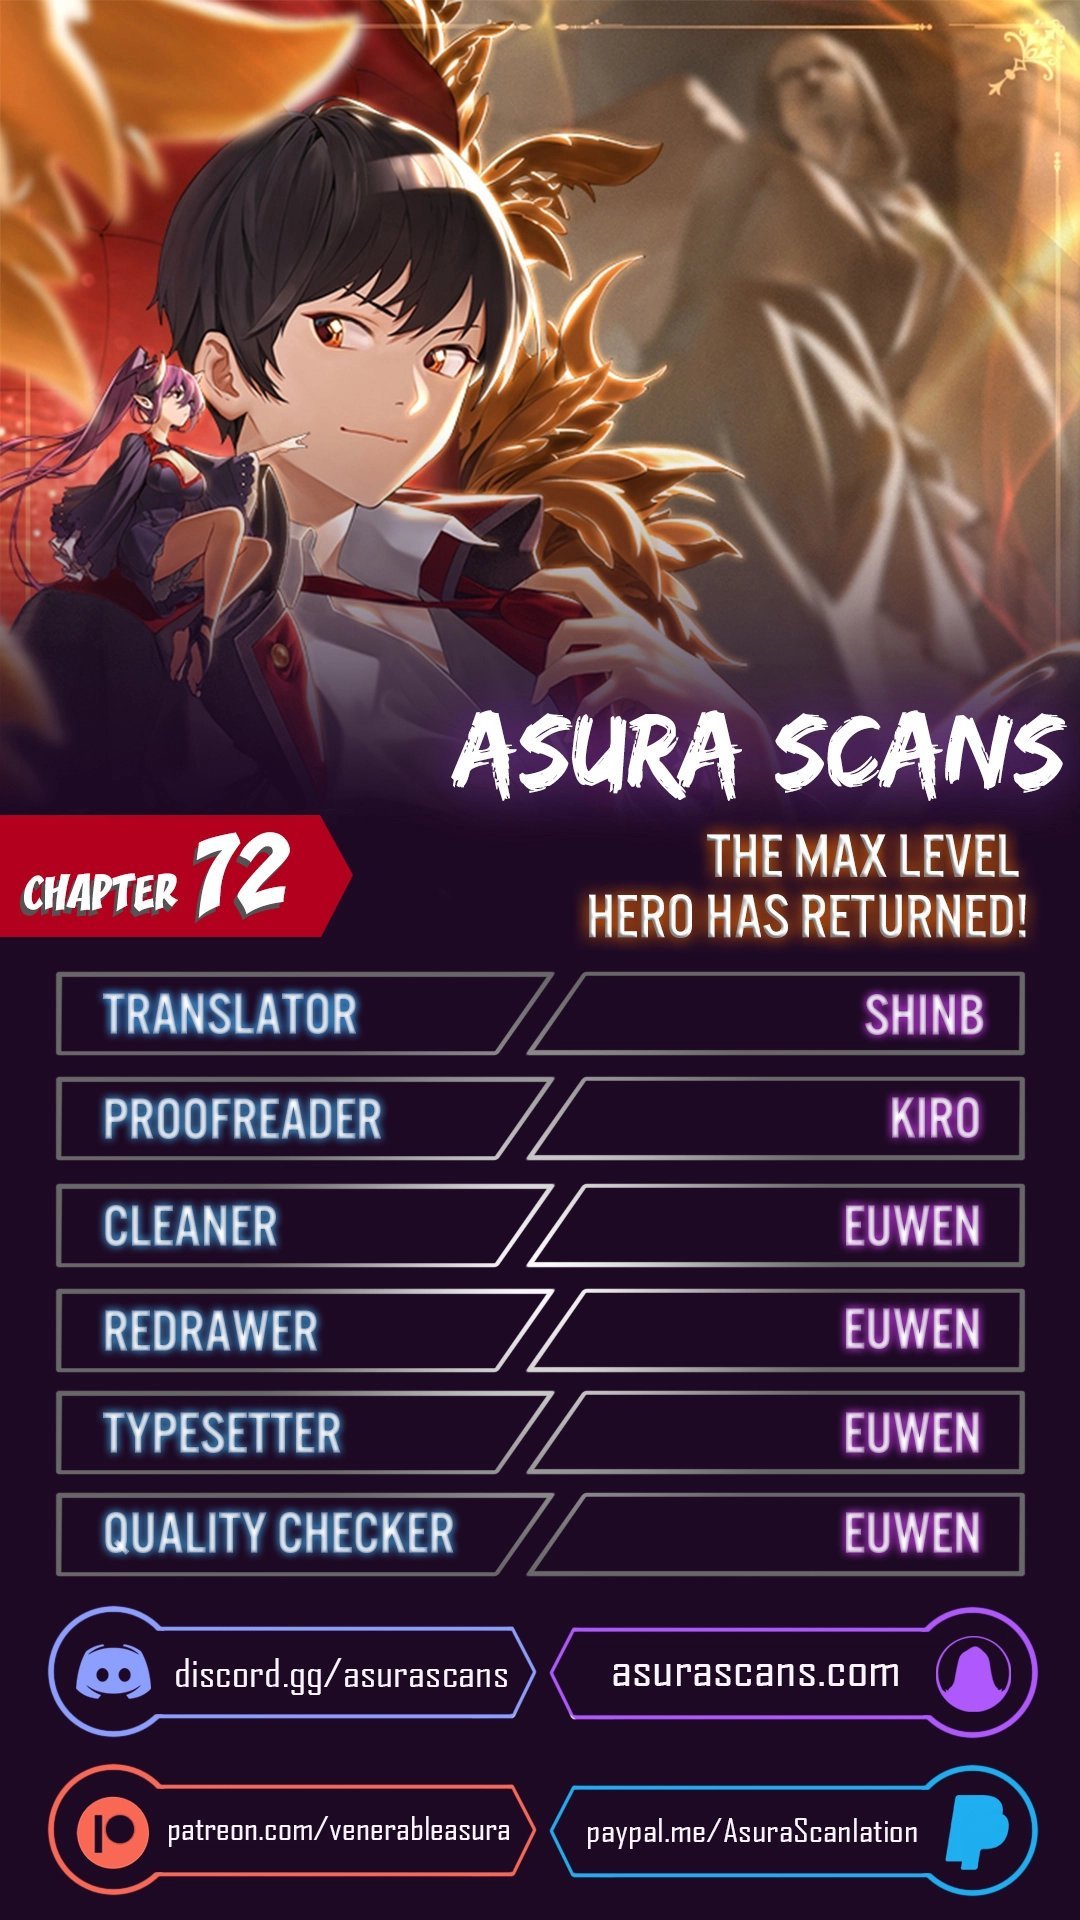 The MAX leveled hero will return! Chapter 72